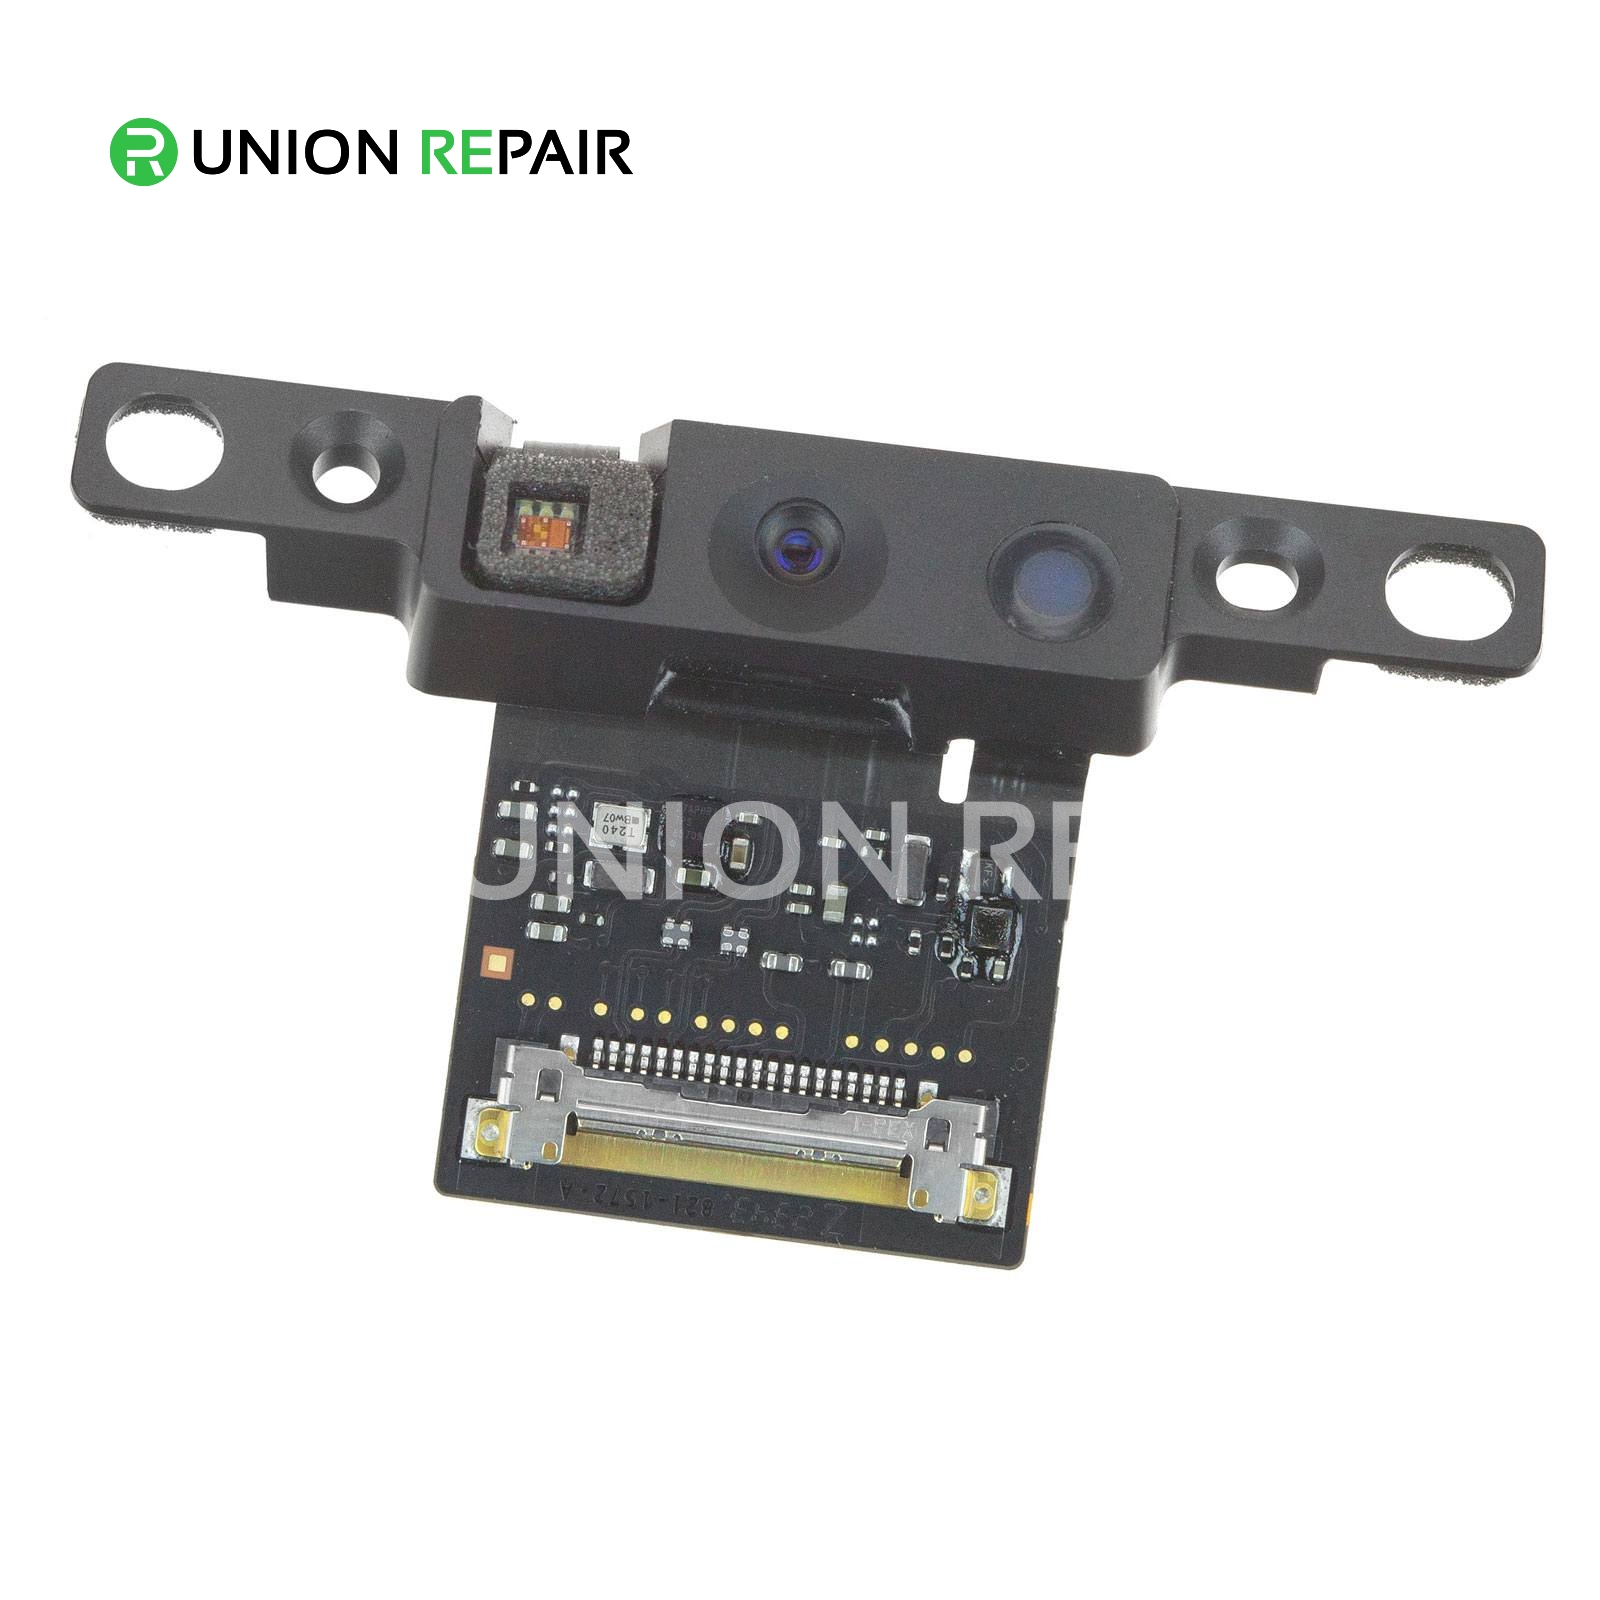 iSight Camera for iMac 27" A1419 (Late 2012, Mid 2015)